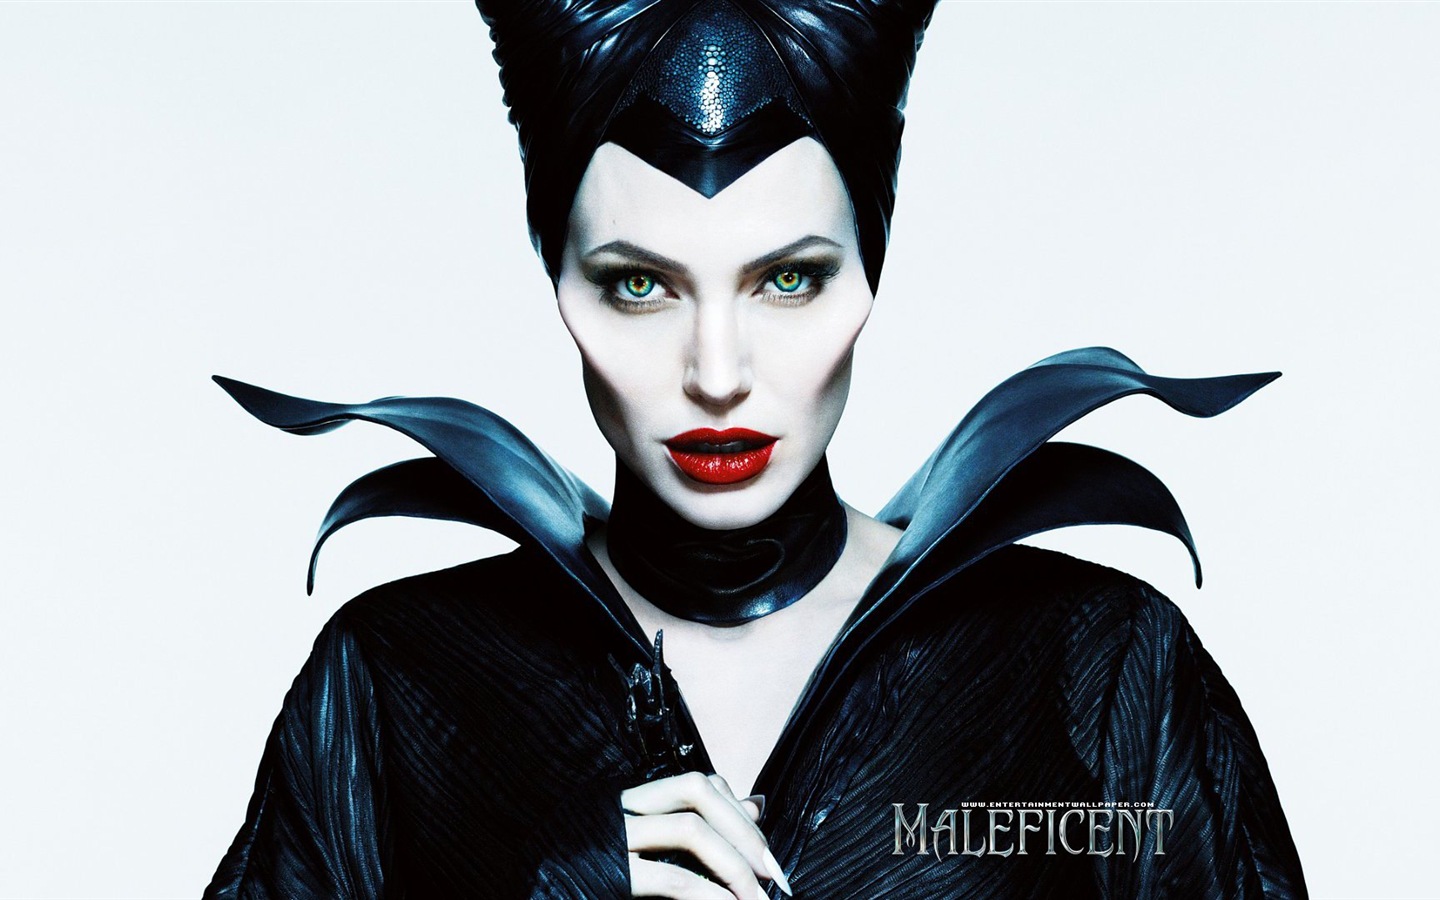 Maleficent 2014 HD movie wallpapers #13 - 1440x900